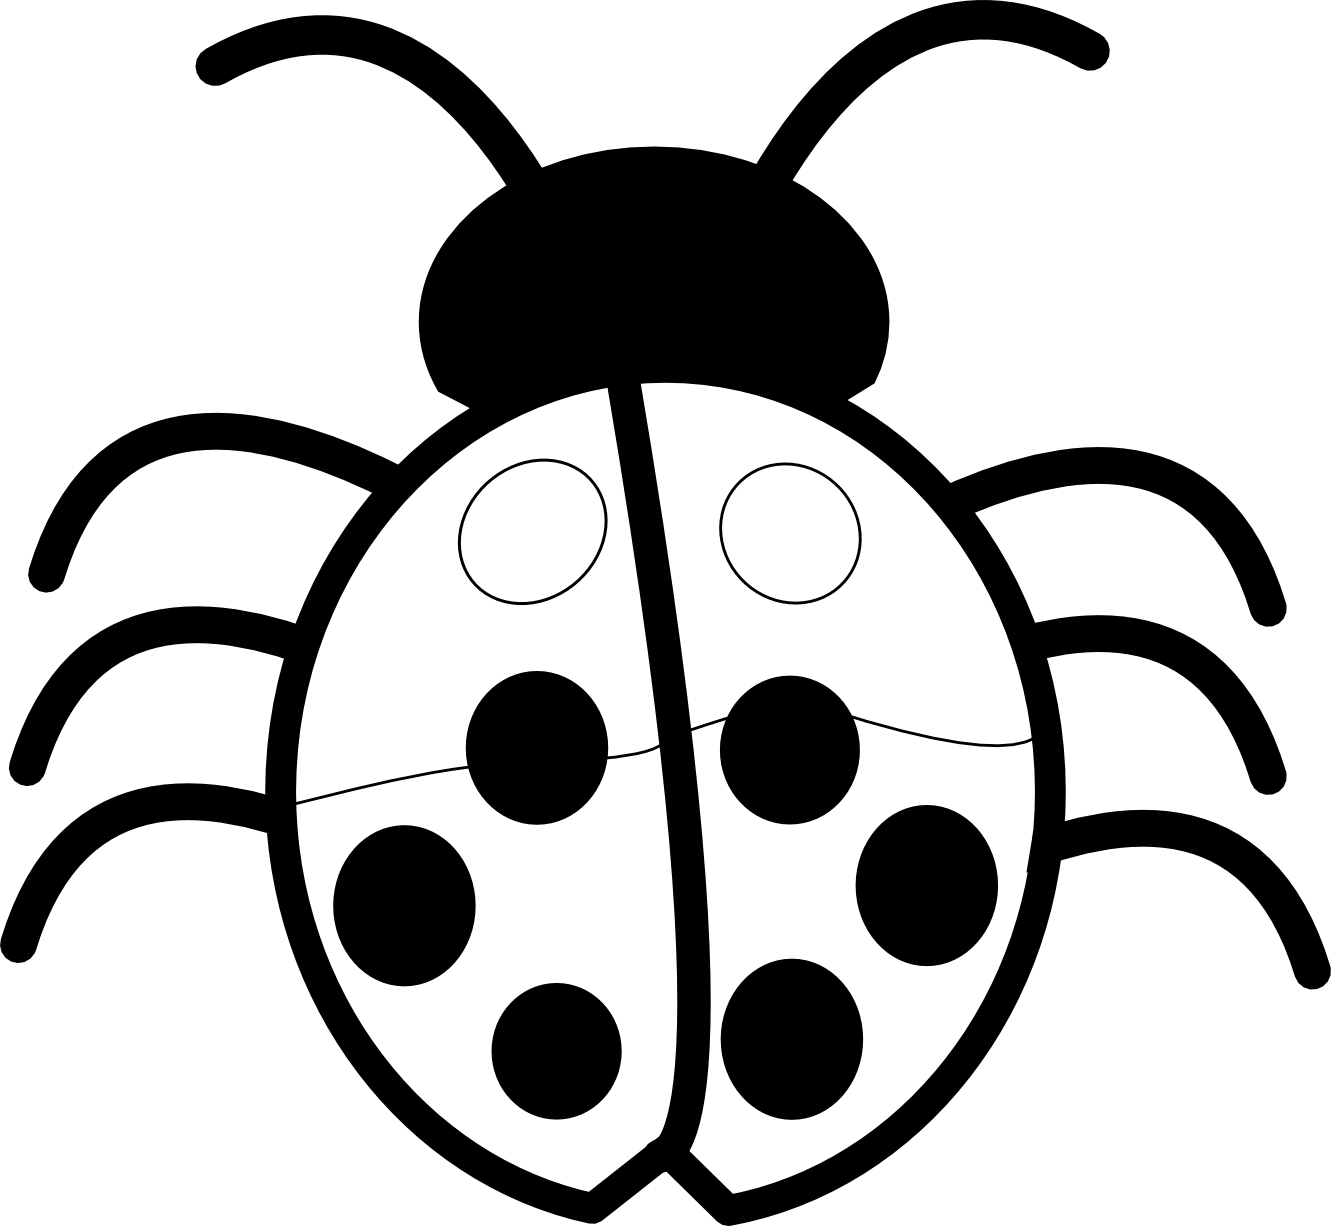 Ladybug Outline Black And White - ClipArt Best